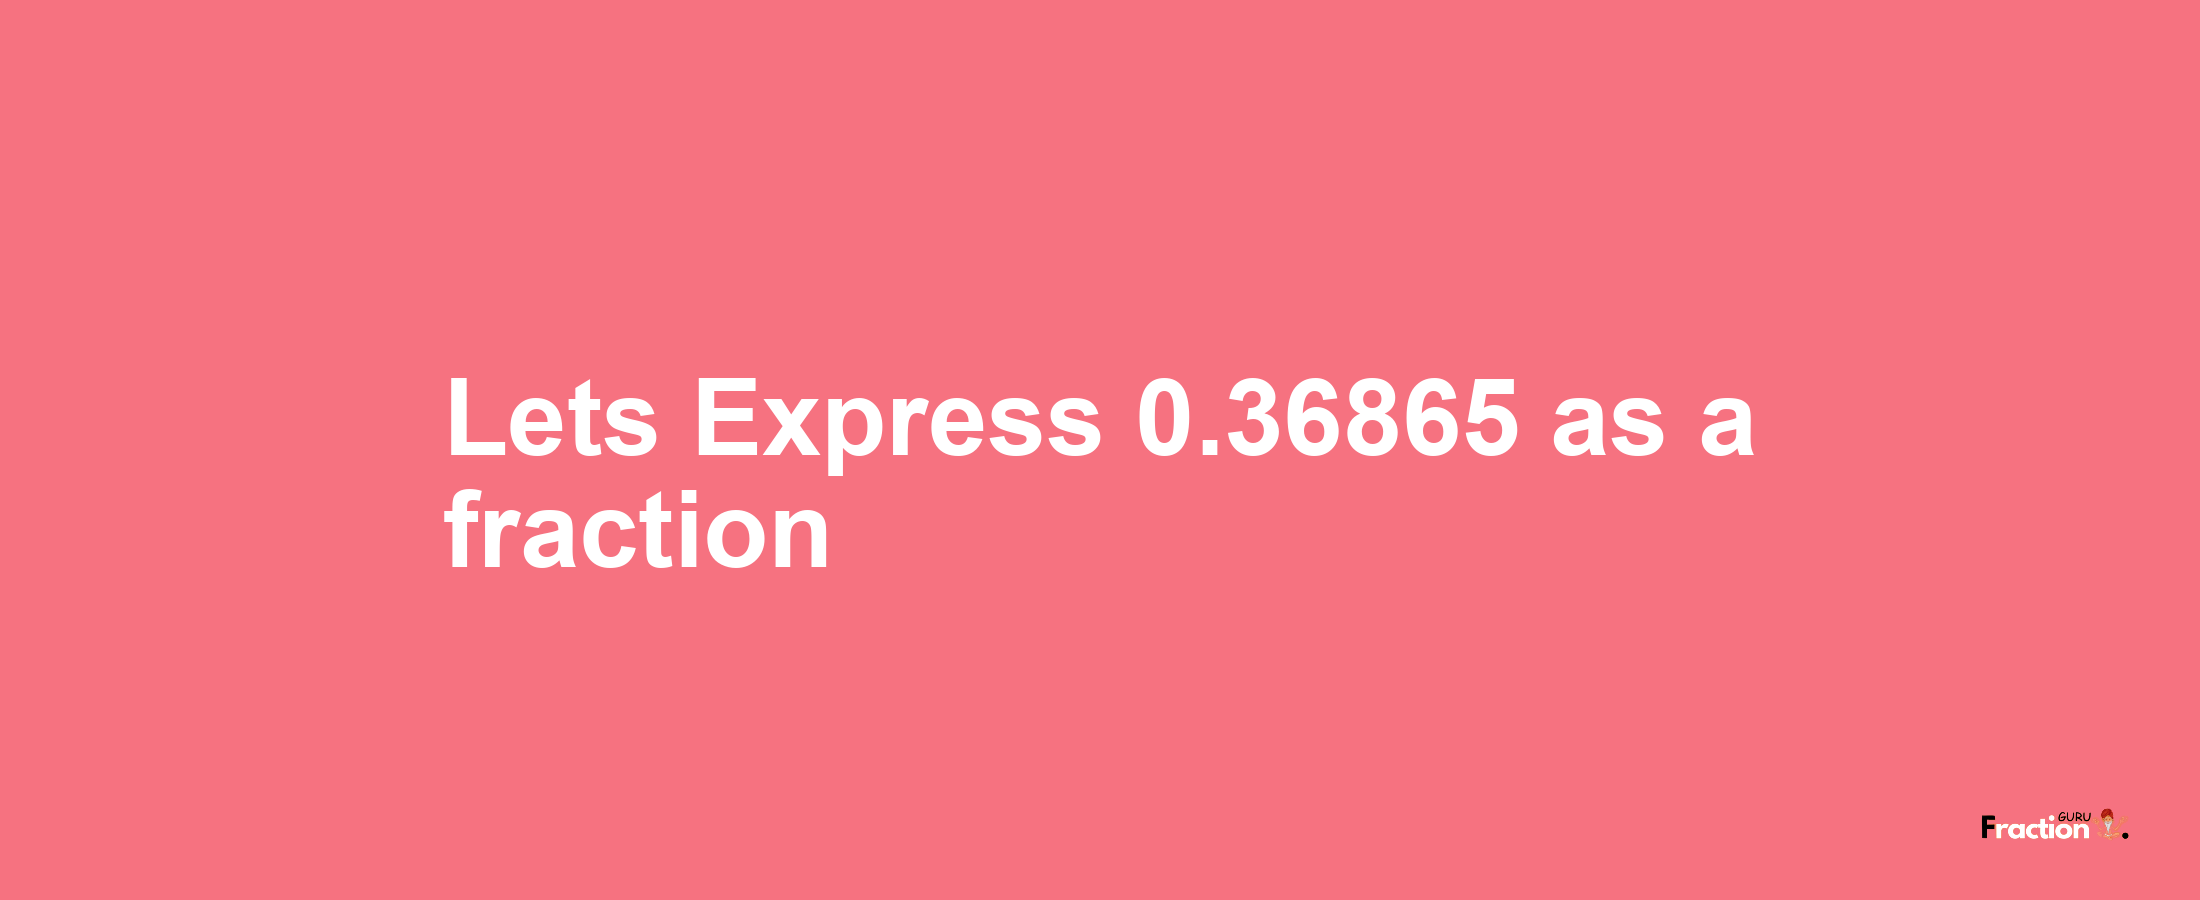 Lets Express 0.36865 as afraction